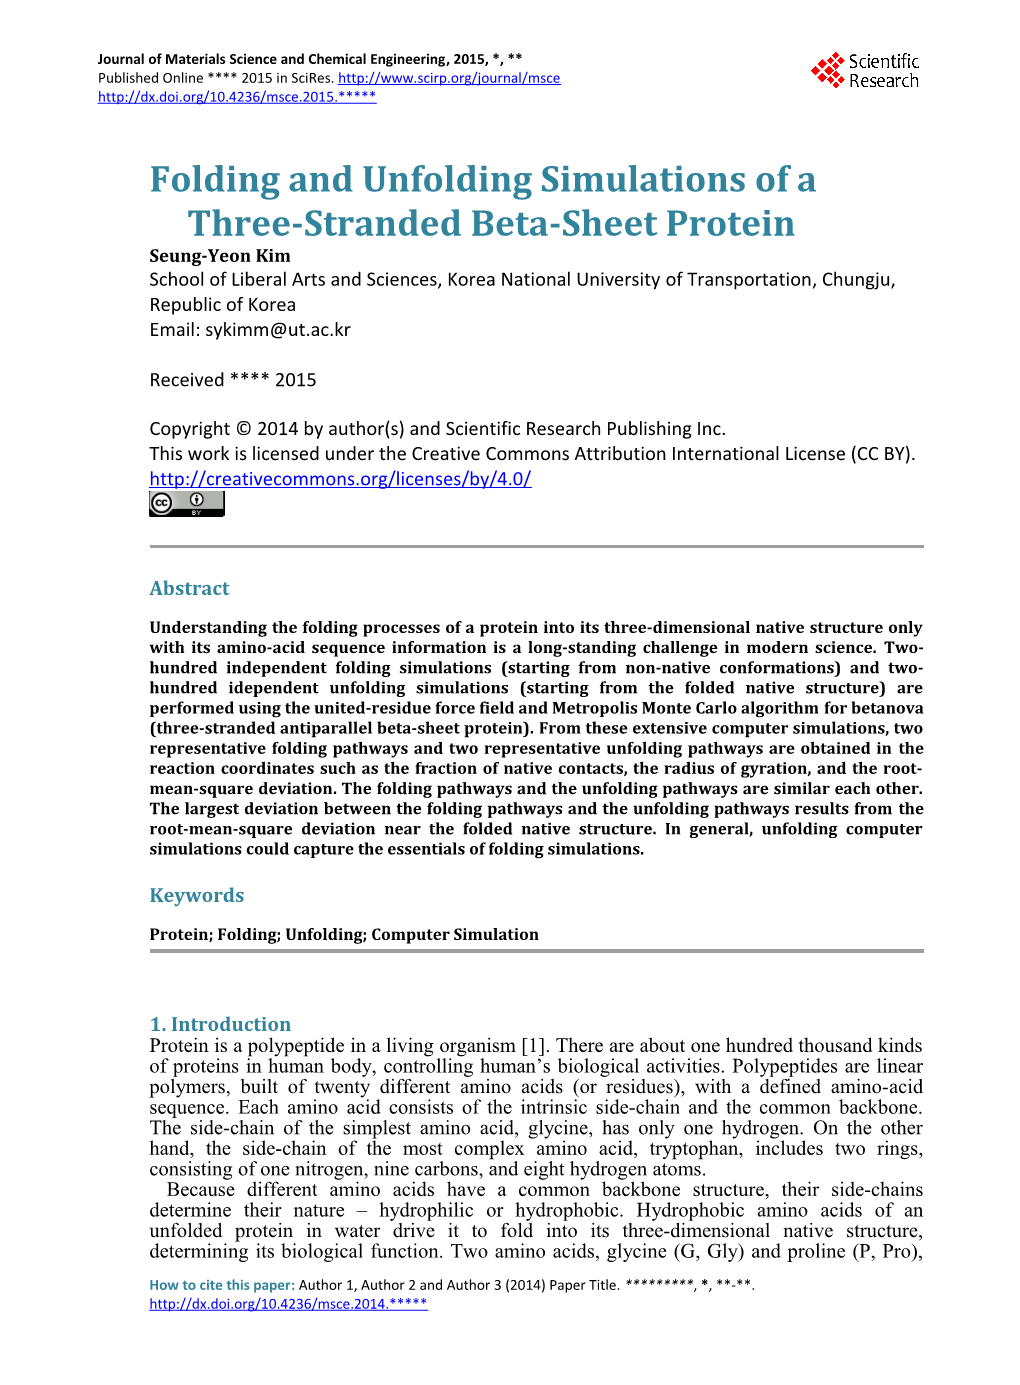 Folding and Unfolding Simulations of a Three-Stranded Beta-Sheet Protein